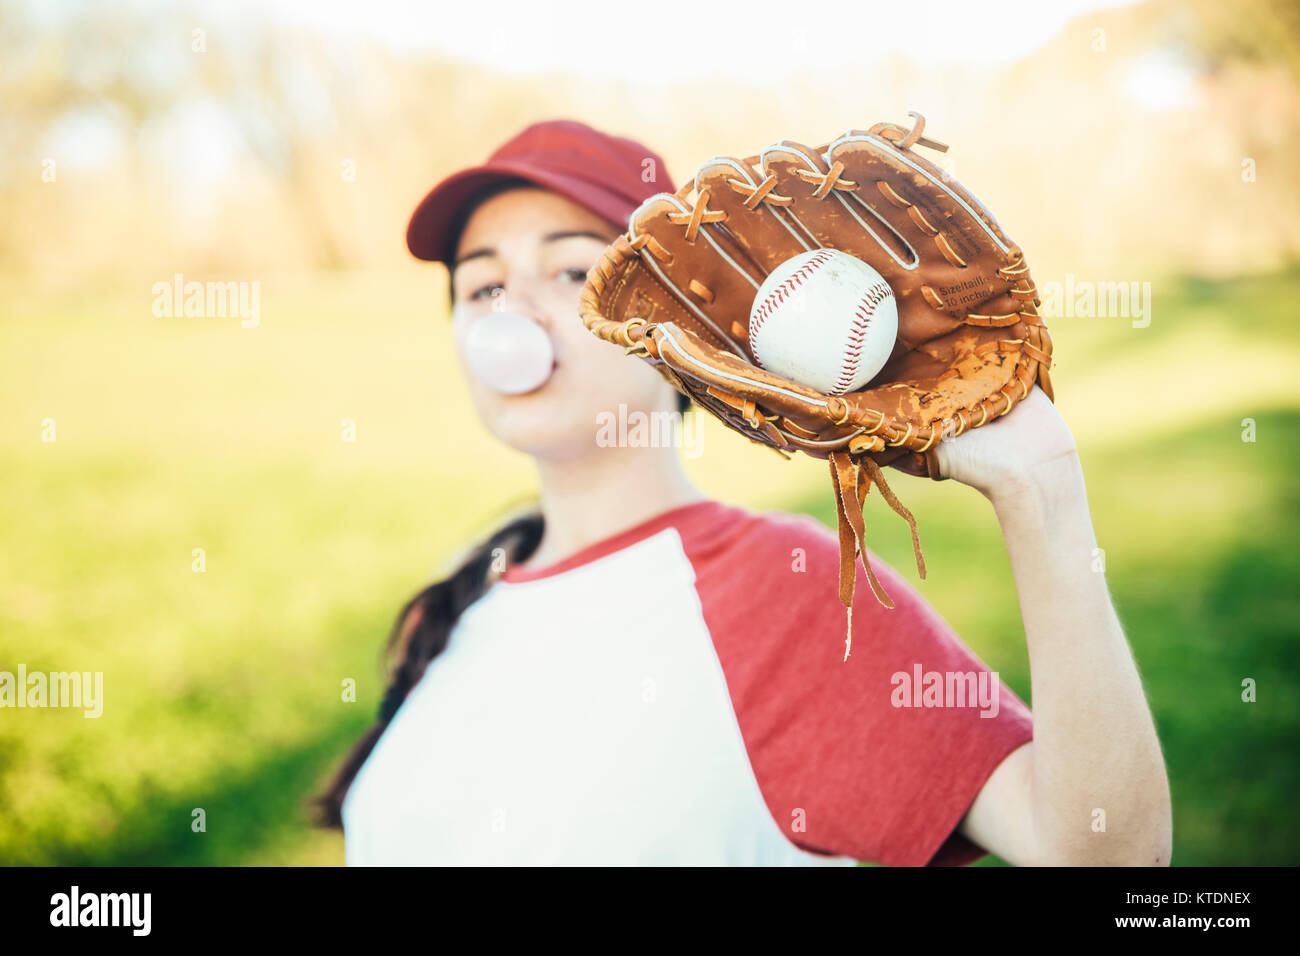 Portrait of young woman with ball and baseball glove blowing a gum bubble Stock Photo